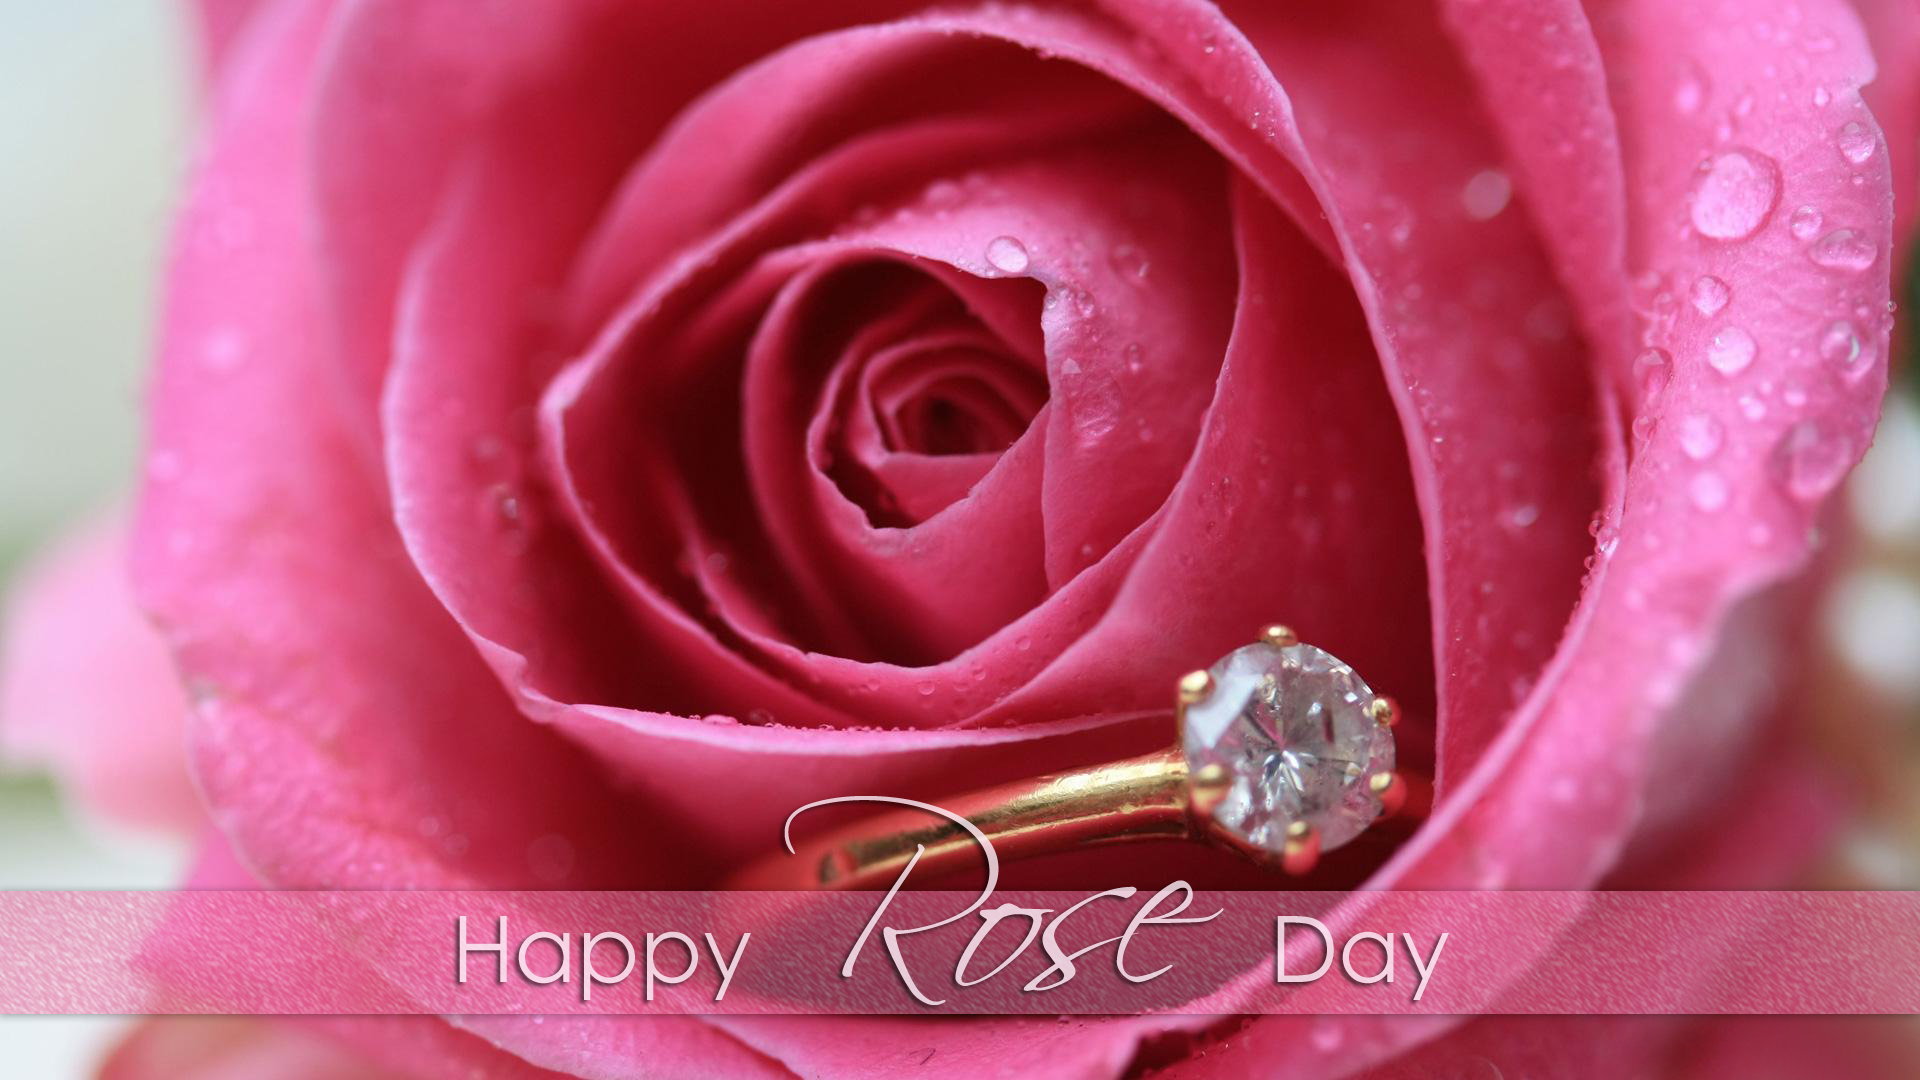 pink-rose-with-happy-rose-day-hd-wallpapers